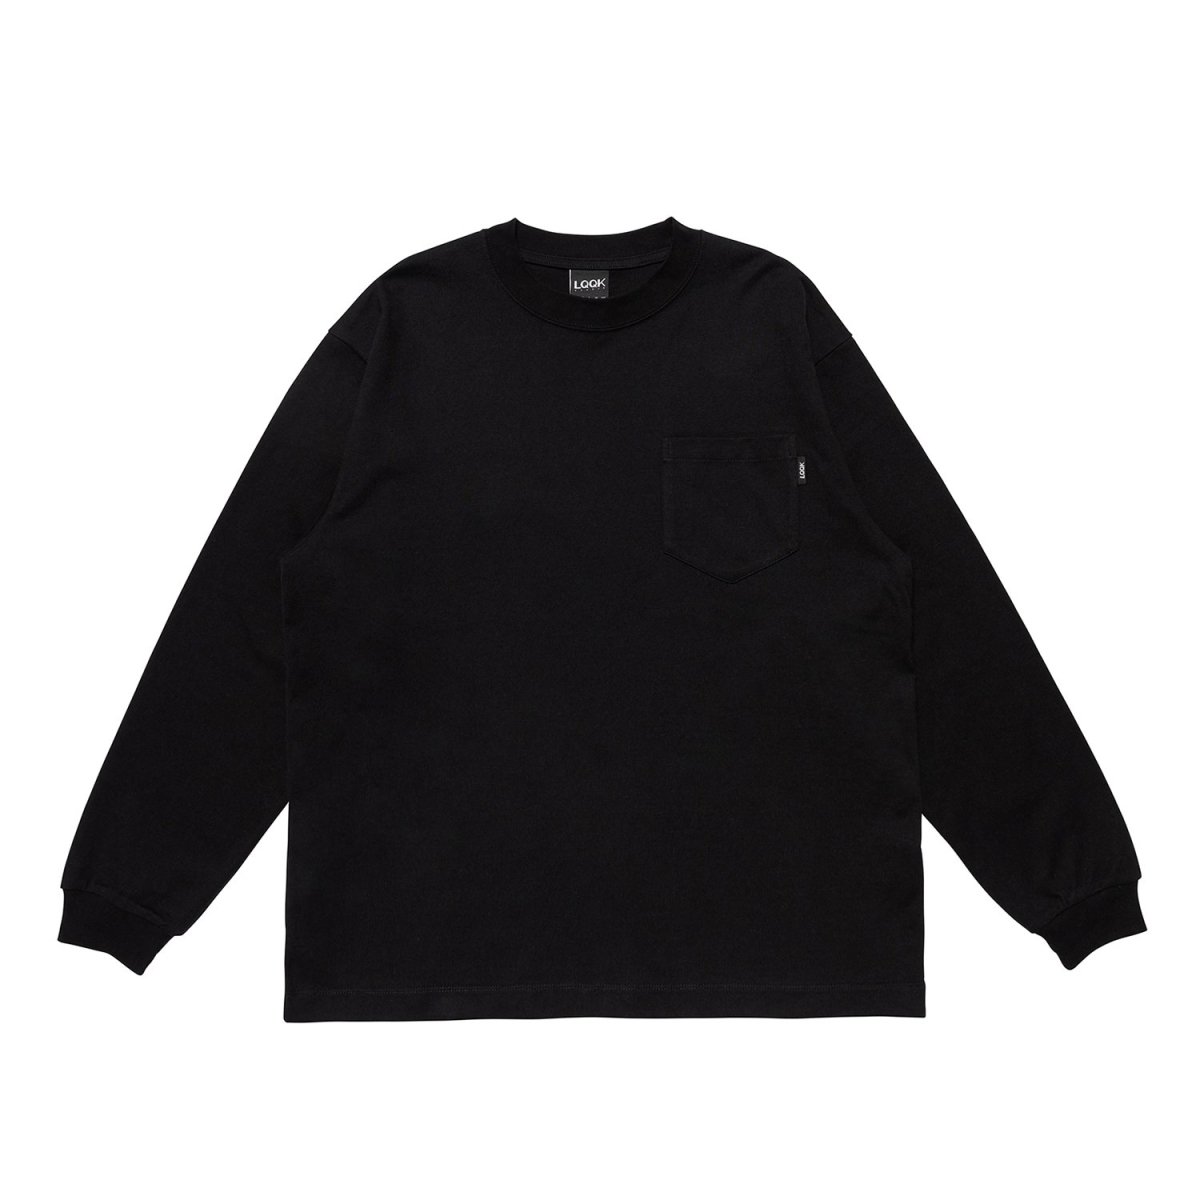 L/S RUGBY WEIGHT POCKET TEEBLACK